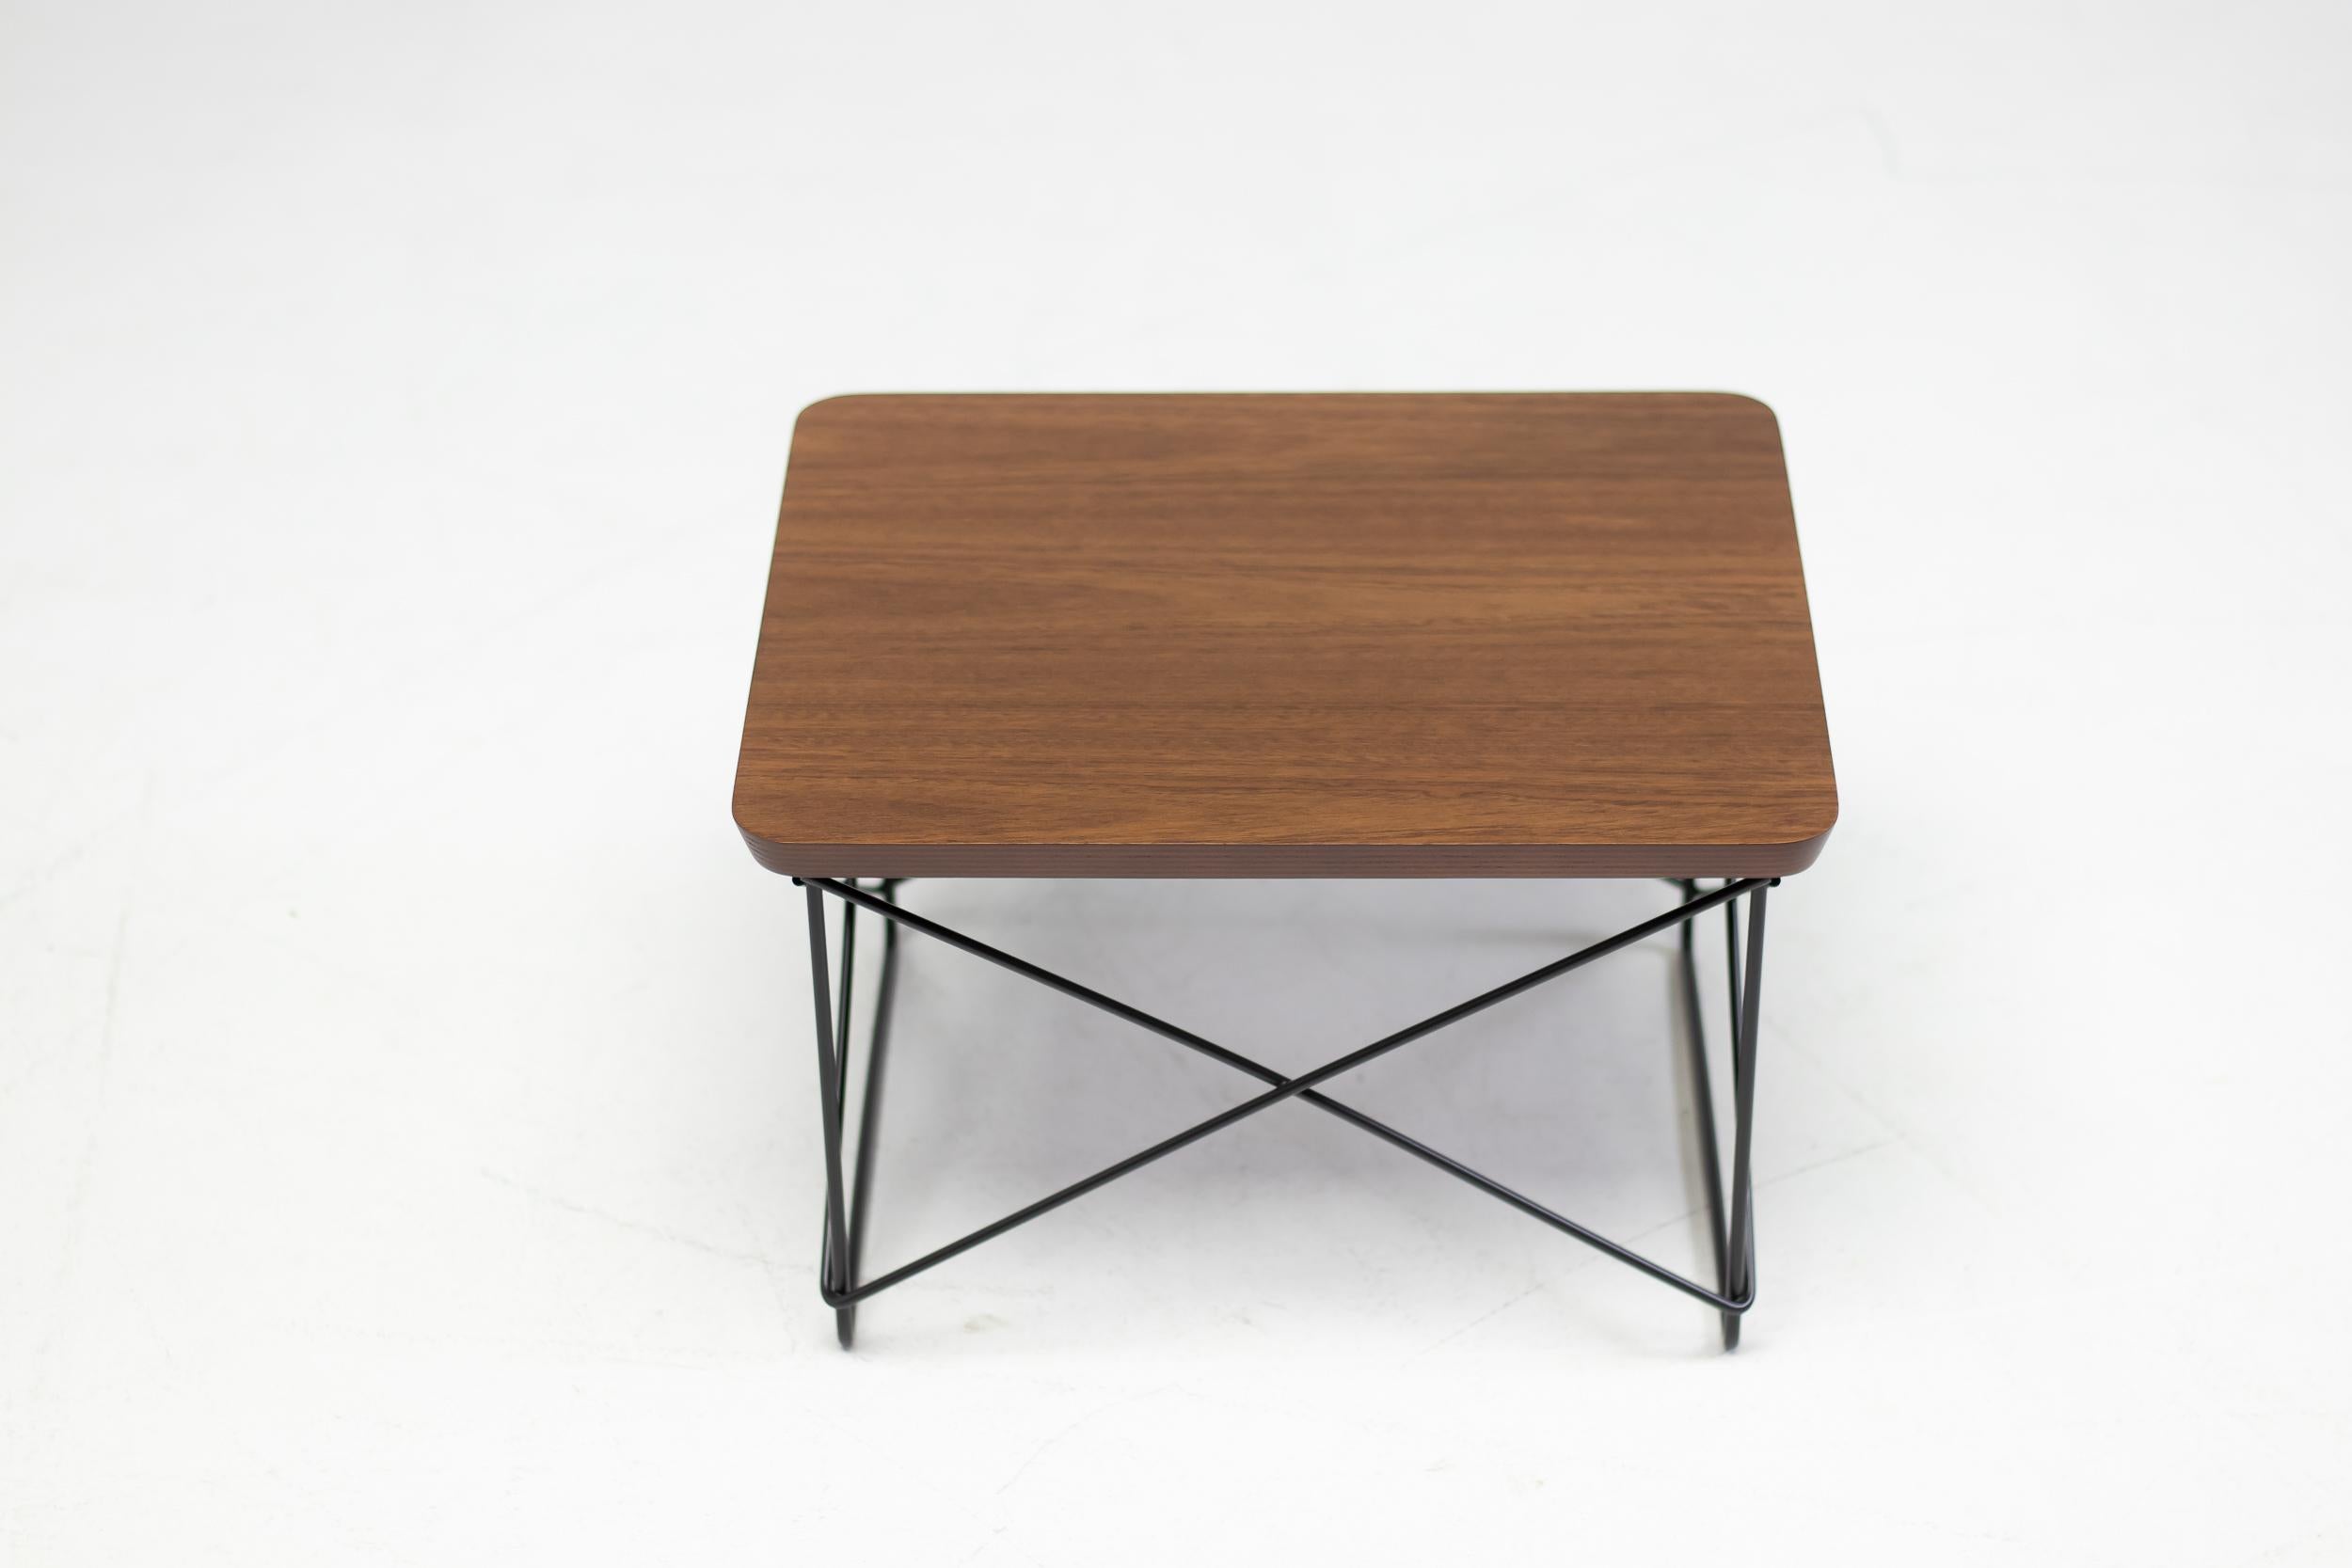 Charles & Ray Eames LTR tables, made by Vitra. Beautiful and exclusive 2018 limited edition sapele wood veneer with black enameled steel base. New old stock, packed in the original box. 
Four available, priced individually.
Signed with a medallion